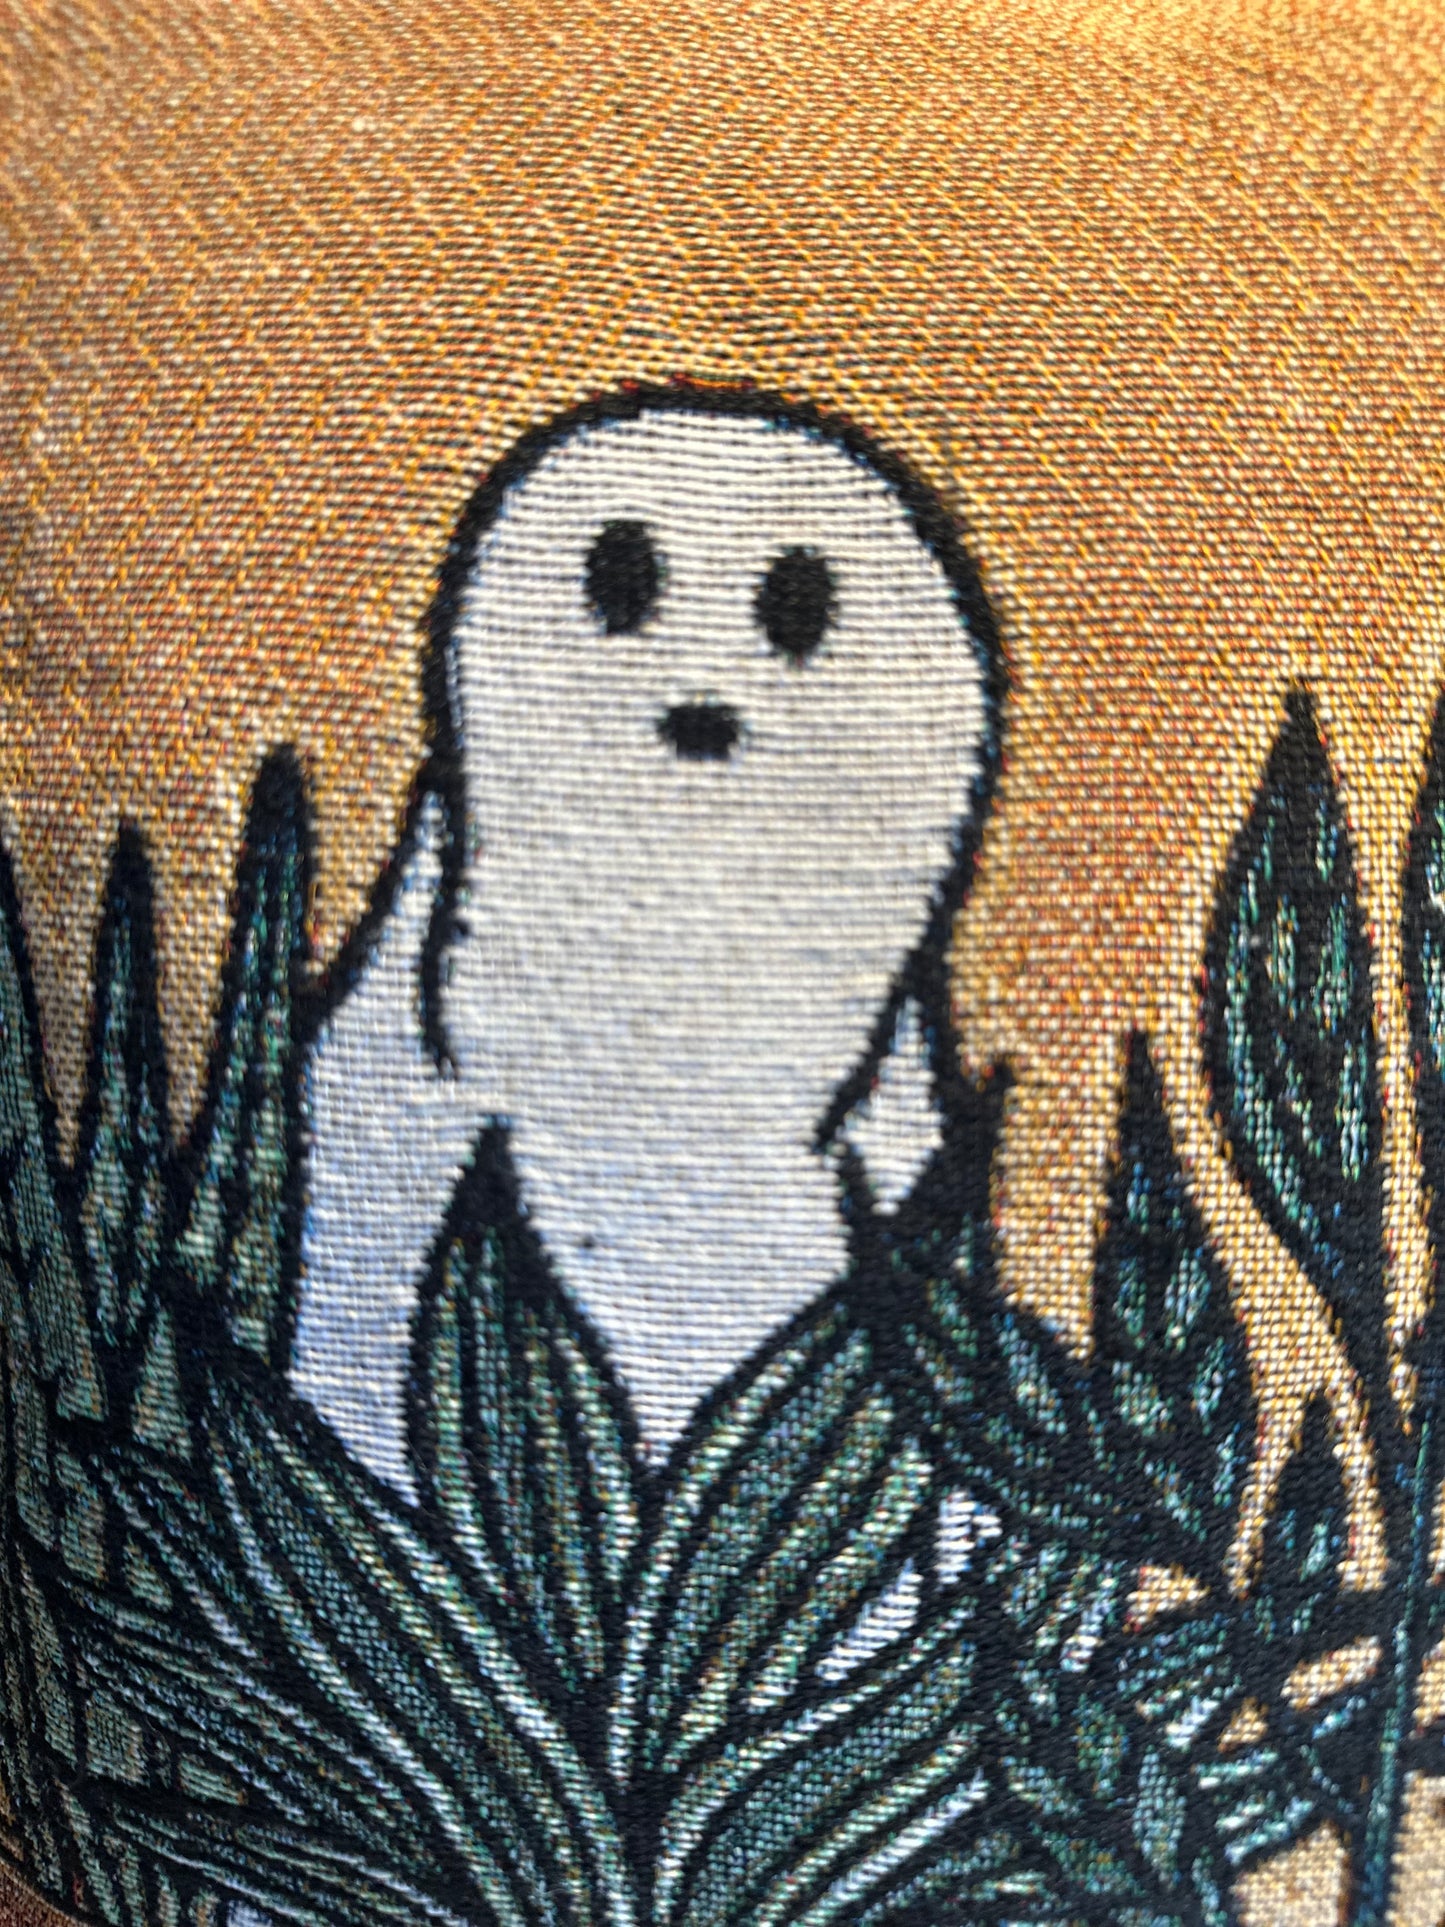 House plants and ghosts woven pillow